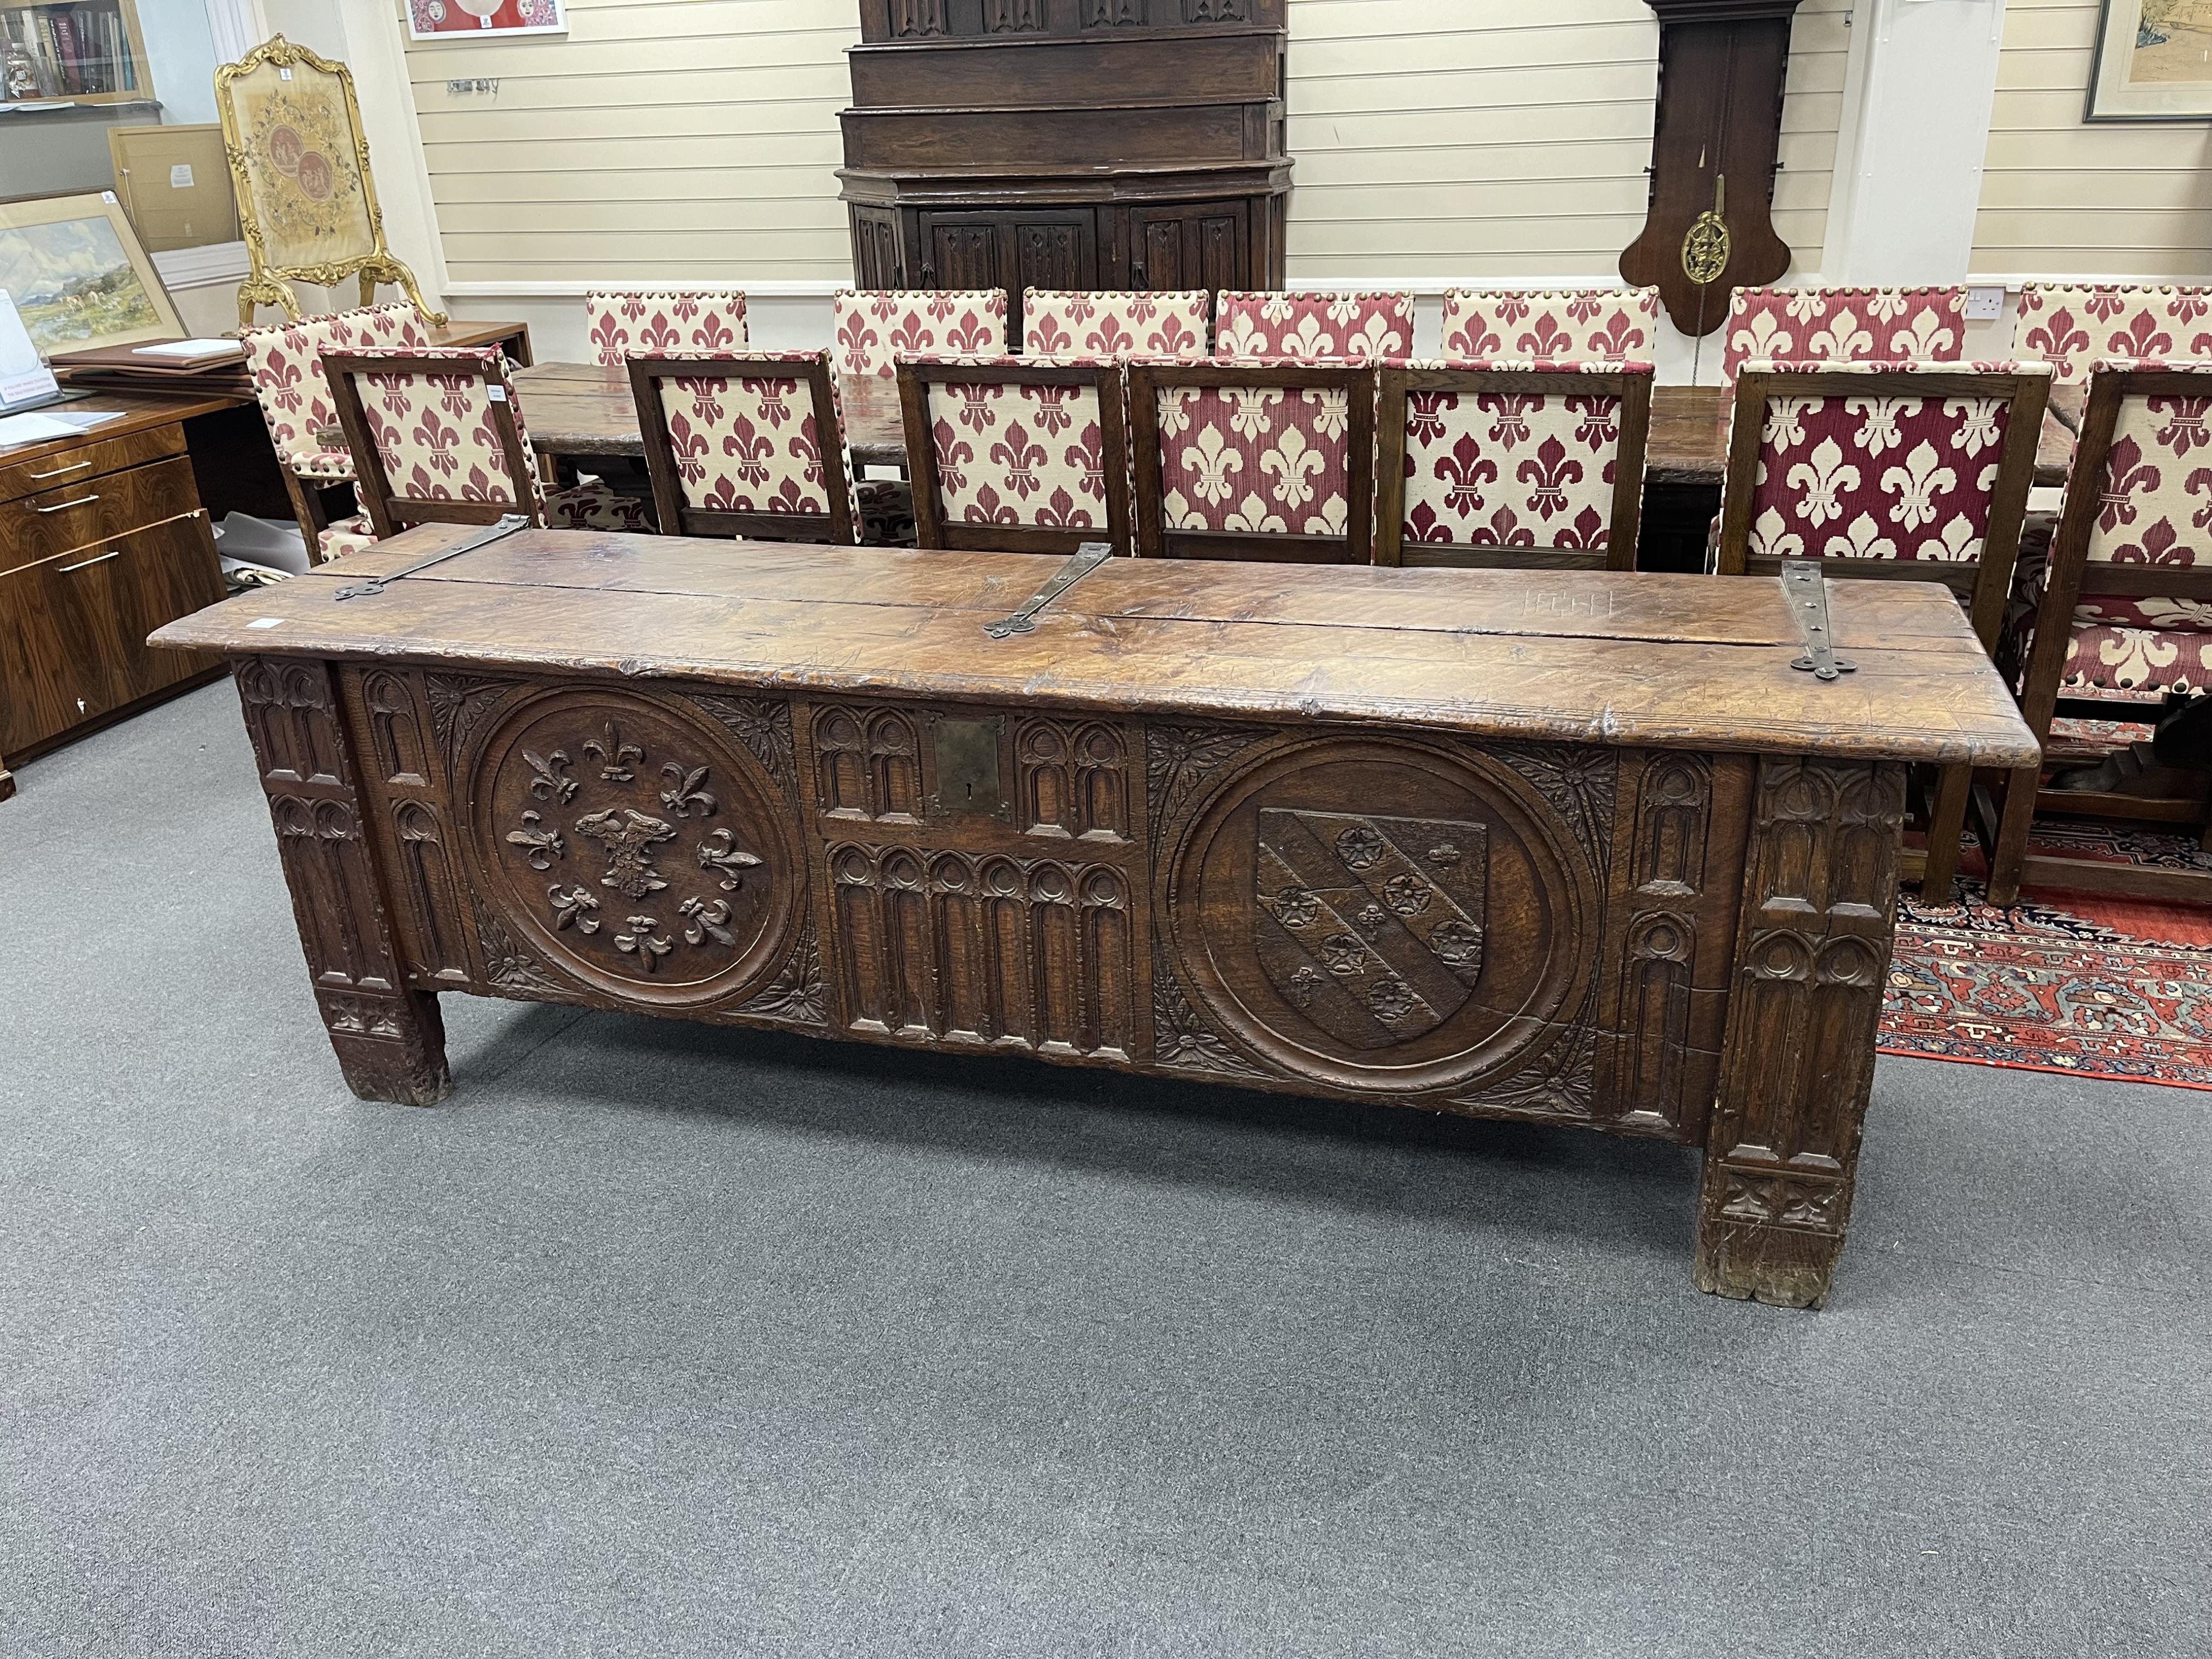 A large and impressive heraldic boarded oak coffer, in 16th century Tudor style, carved with armorial roundels, width 243cm, depth 65cm, height 78cm. Condition - fair, Provenance - made for Brede Place, Brede, Rye, East